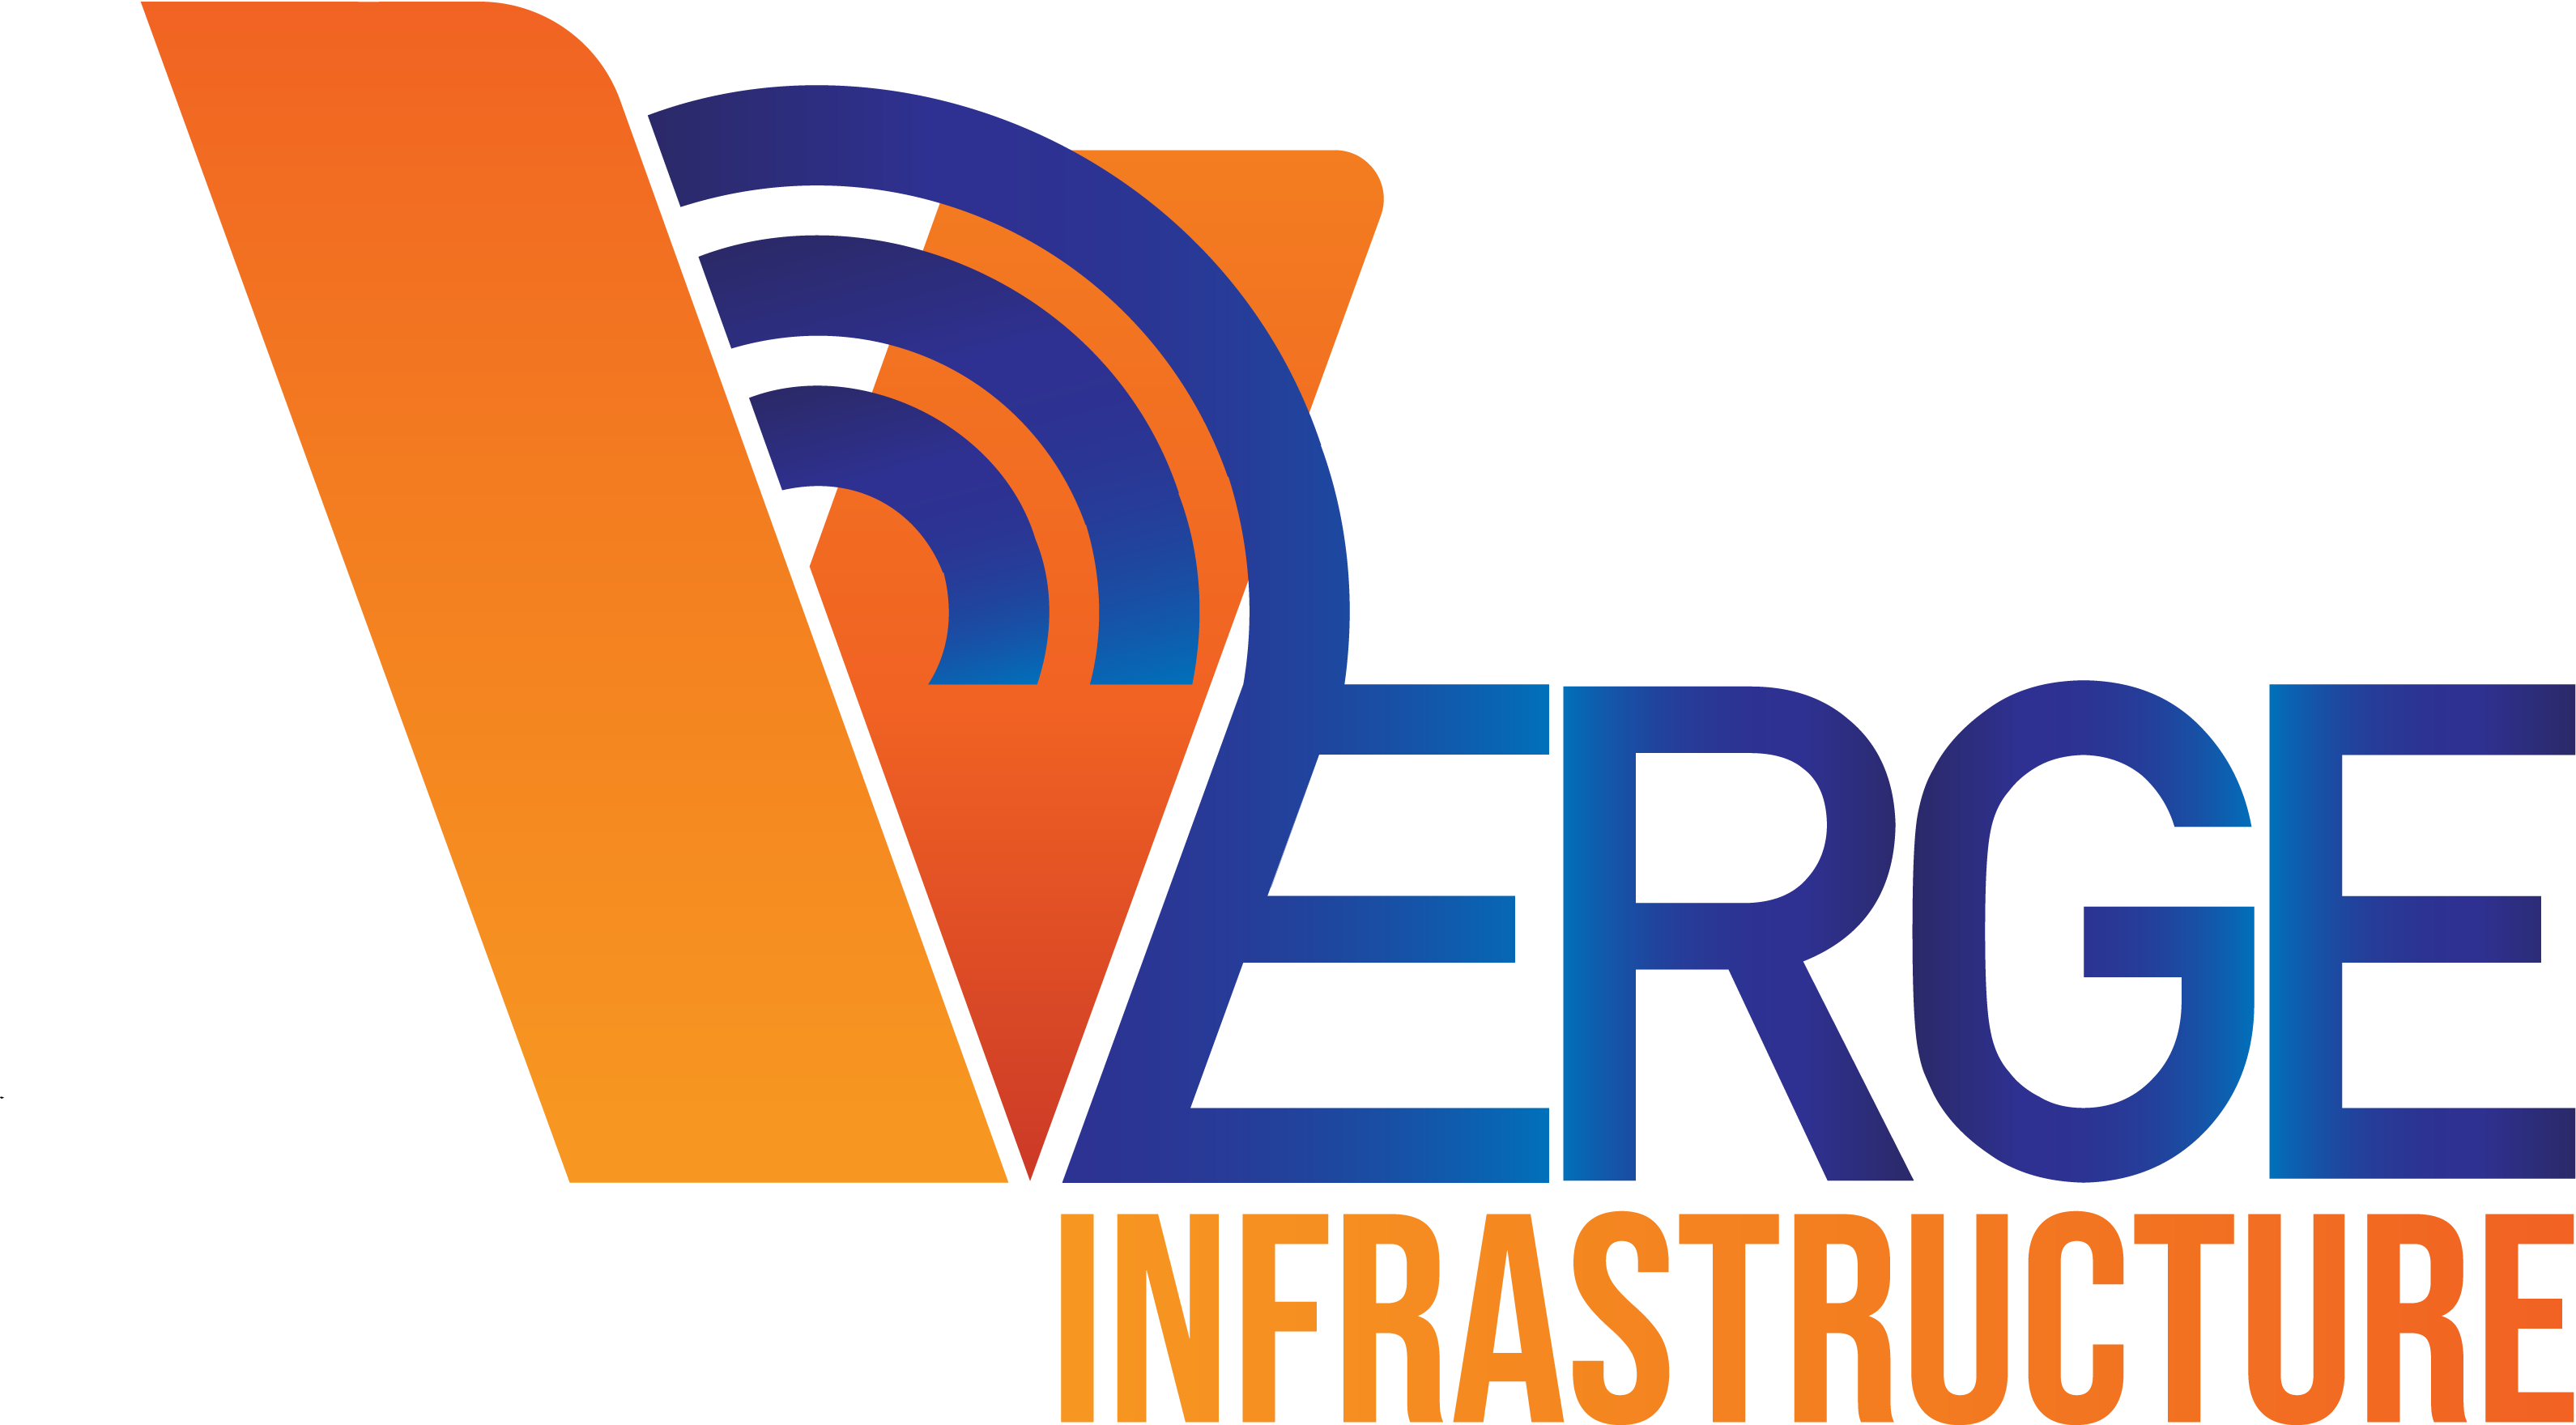 Verge Infrastructure Limited